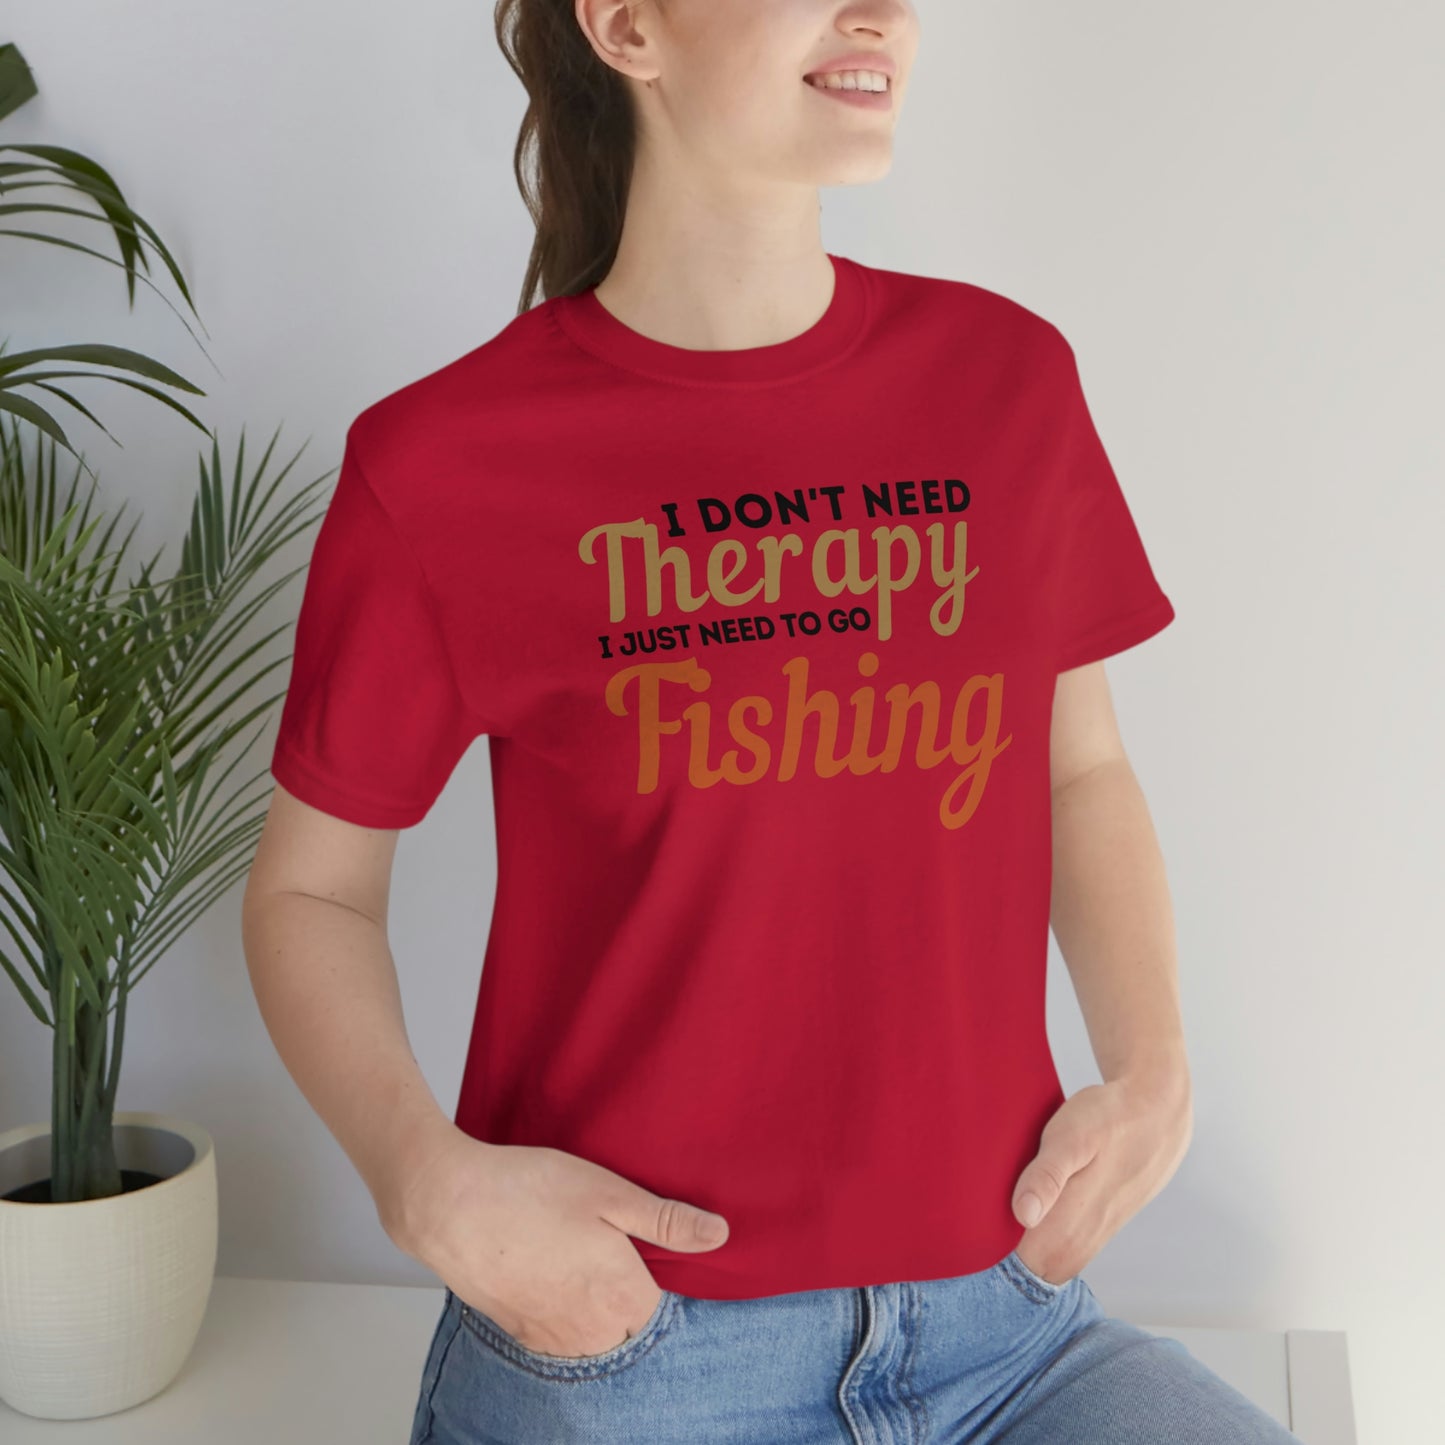 I don't need therapy I just need to go Fishing, fishing shirt, dad shirt, dad gift, gift for outdoor lover, fishing gift nature lover shirt